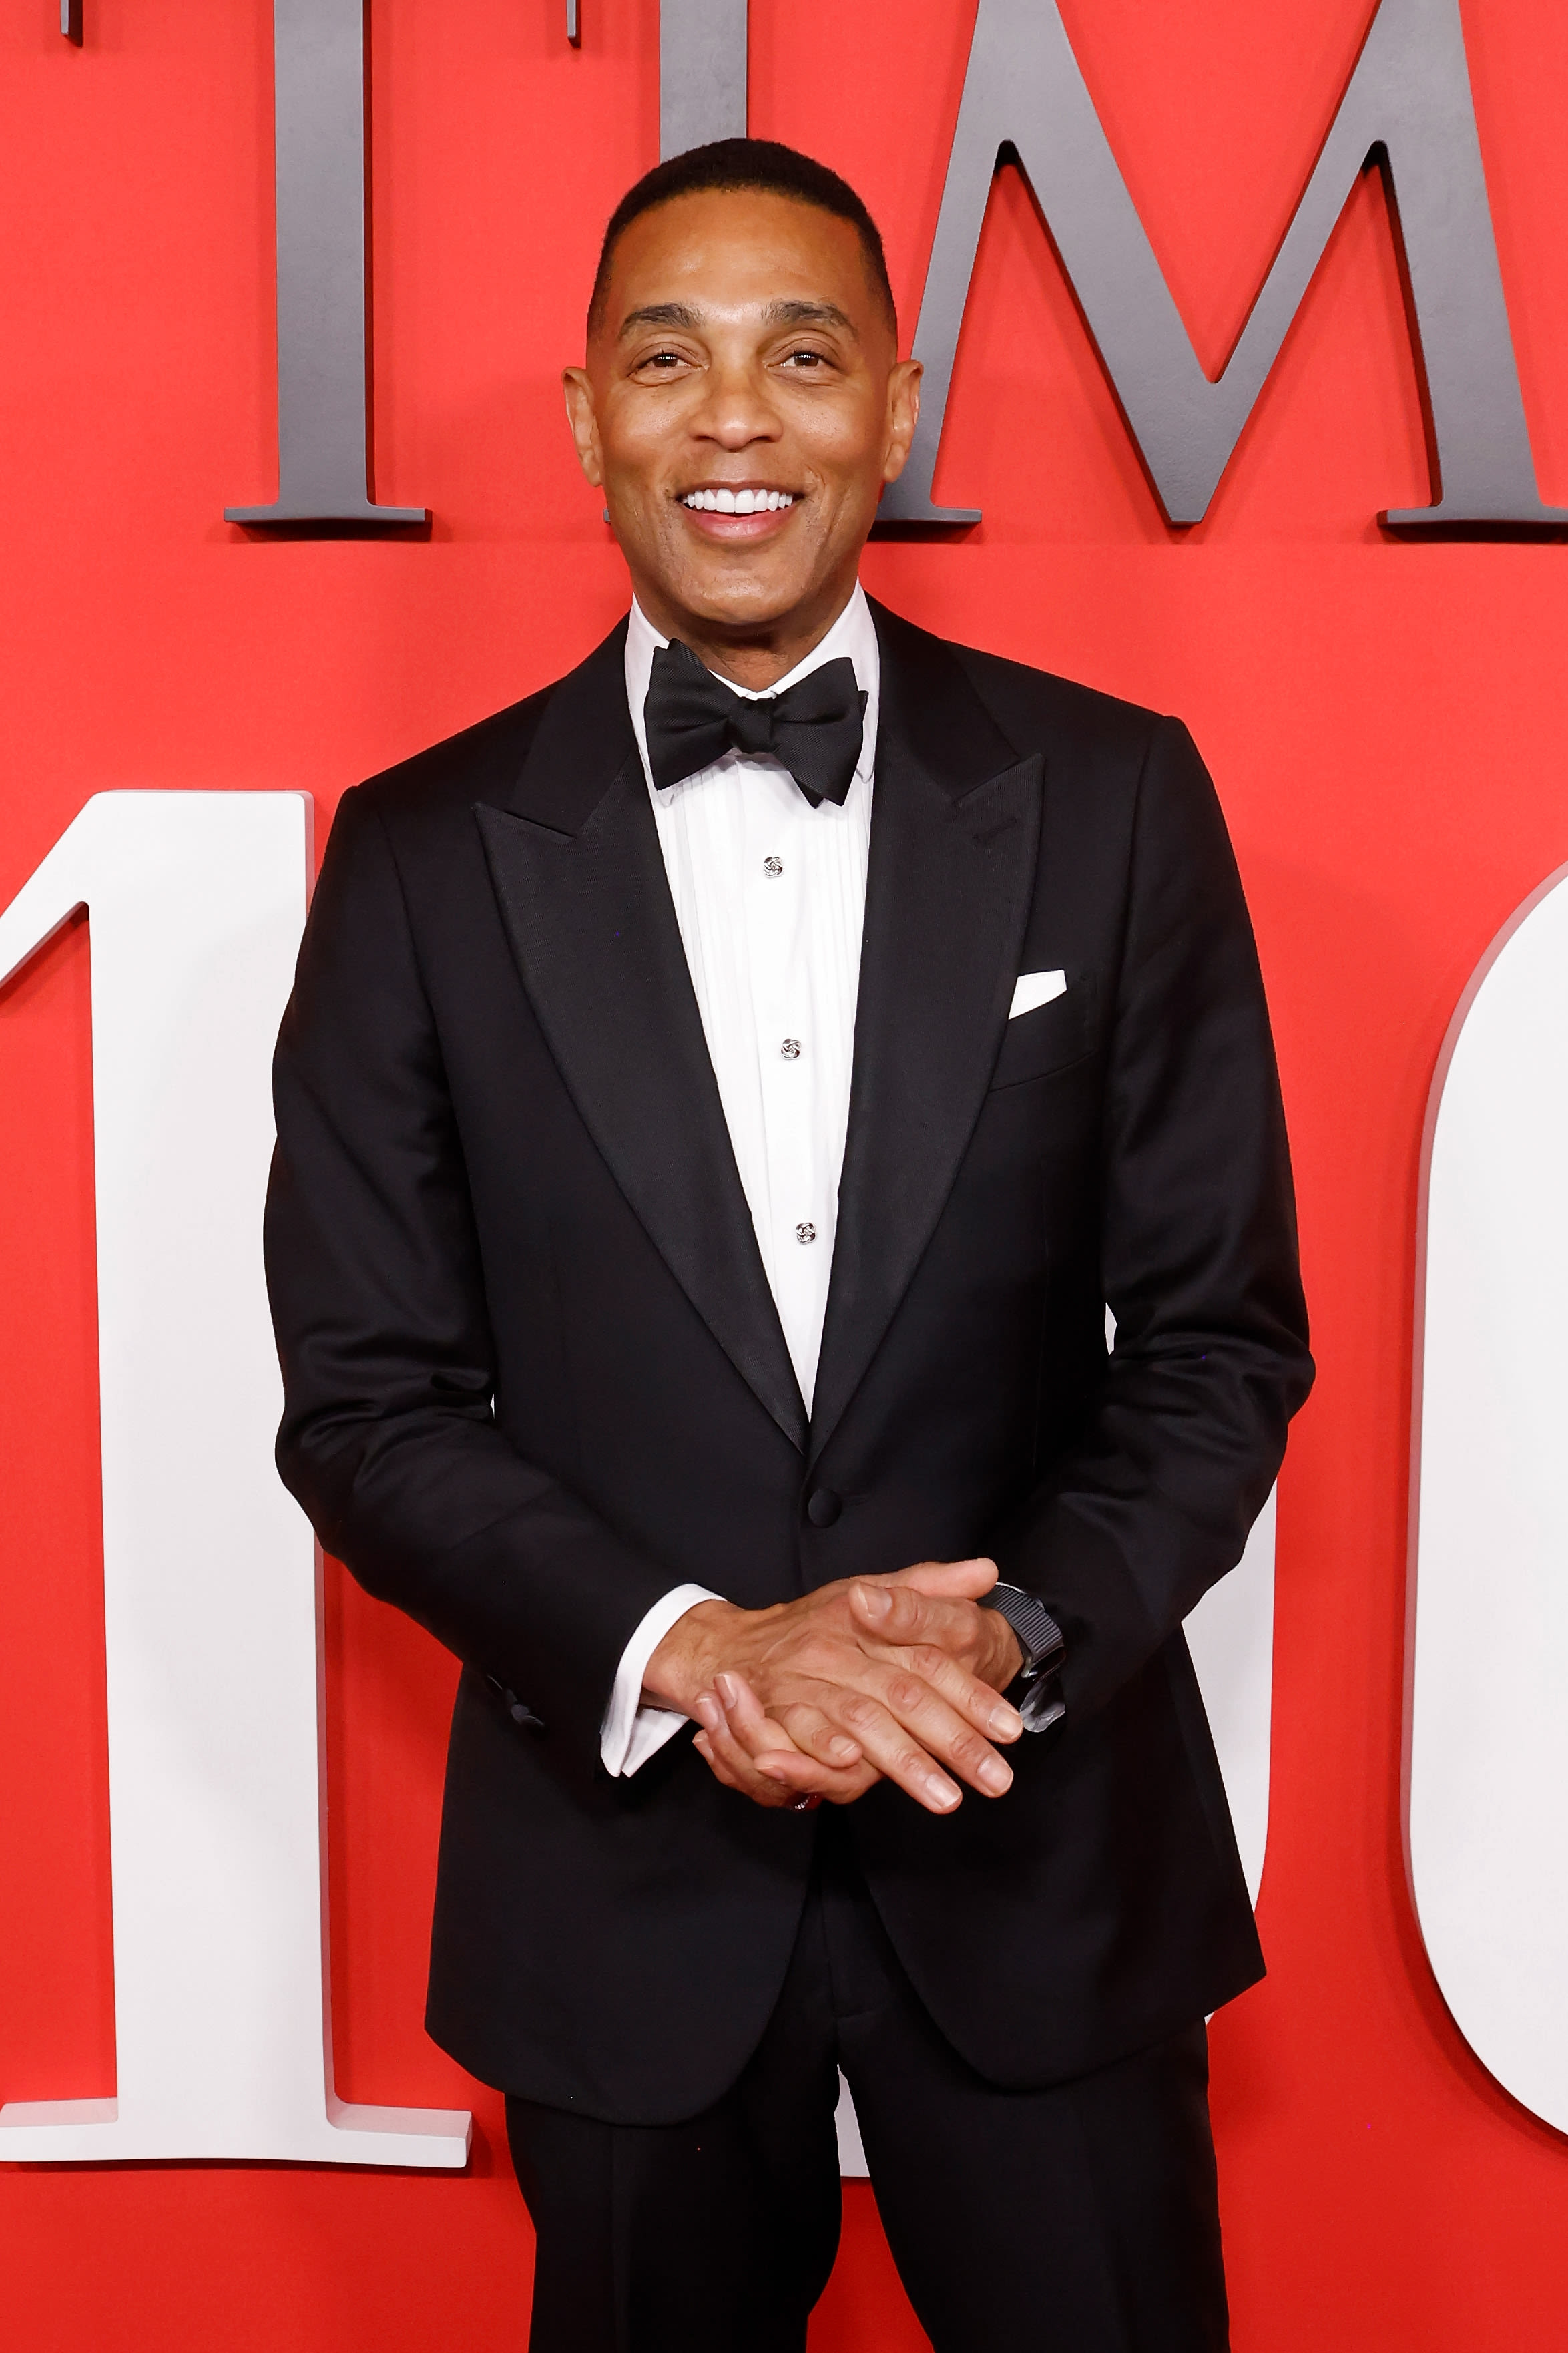 Don Lemon Always Dreamed of ‘His Own Talk Show’ That Would Let Him ‘Step Away From Politics’